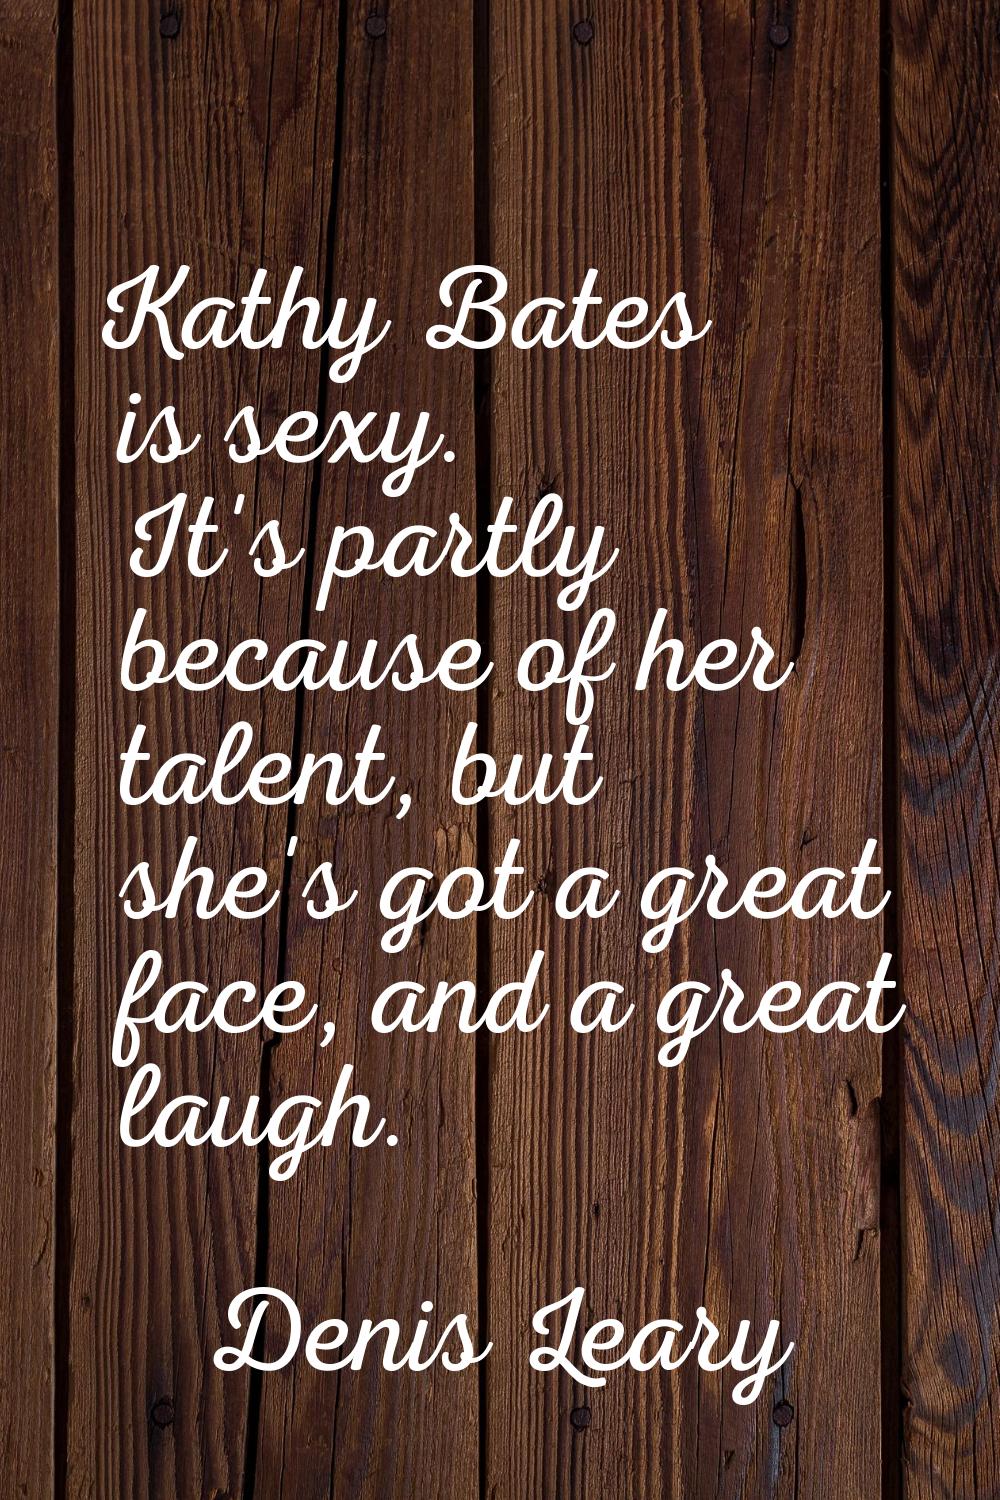 Kathy Bates is sexy. It's partly because of her talent, but she's got a great face, and a great lau